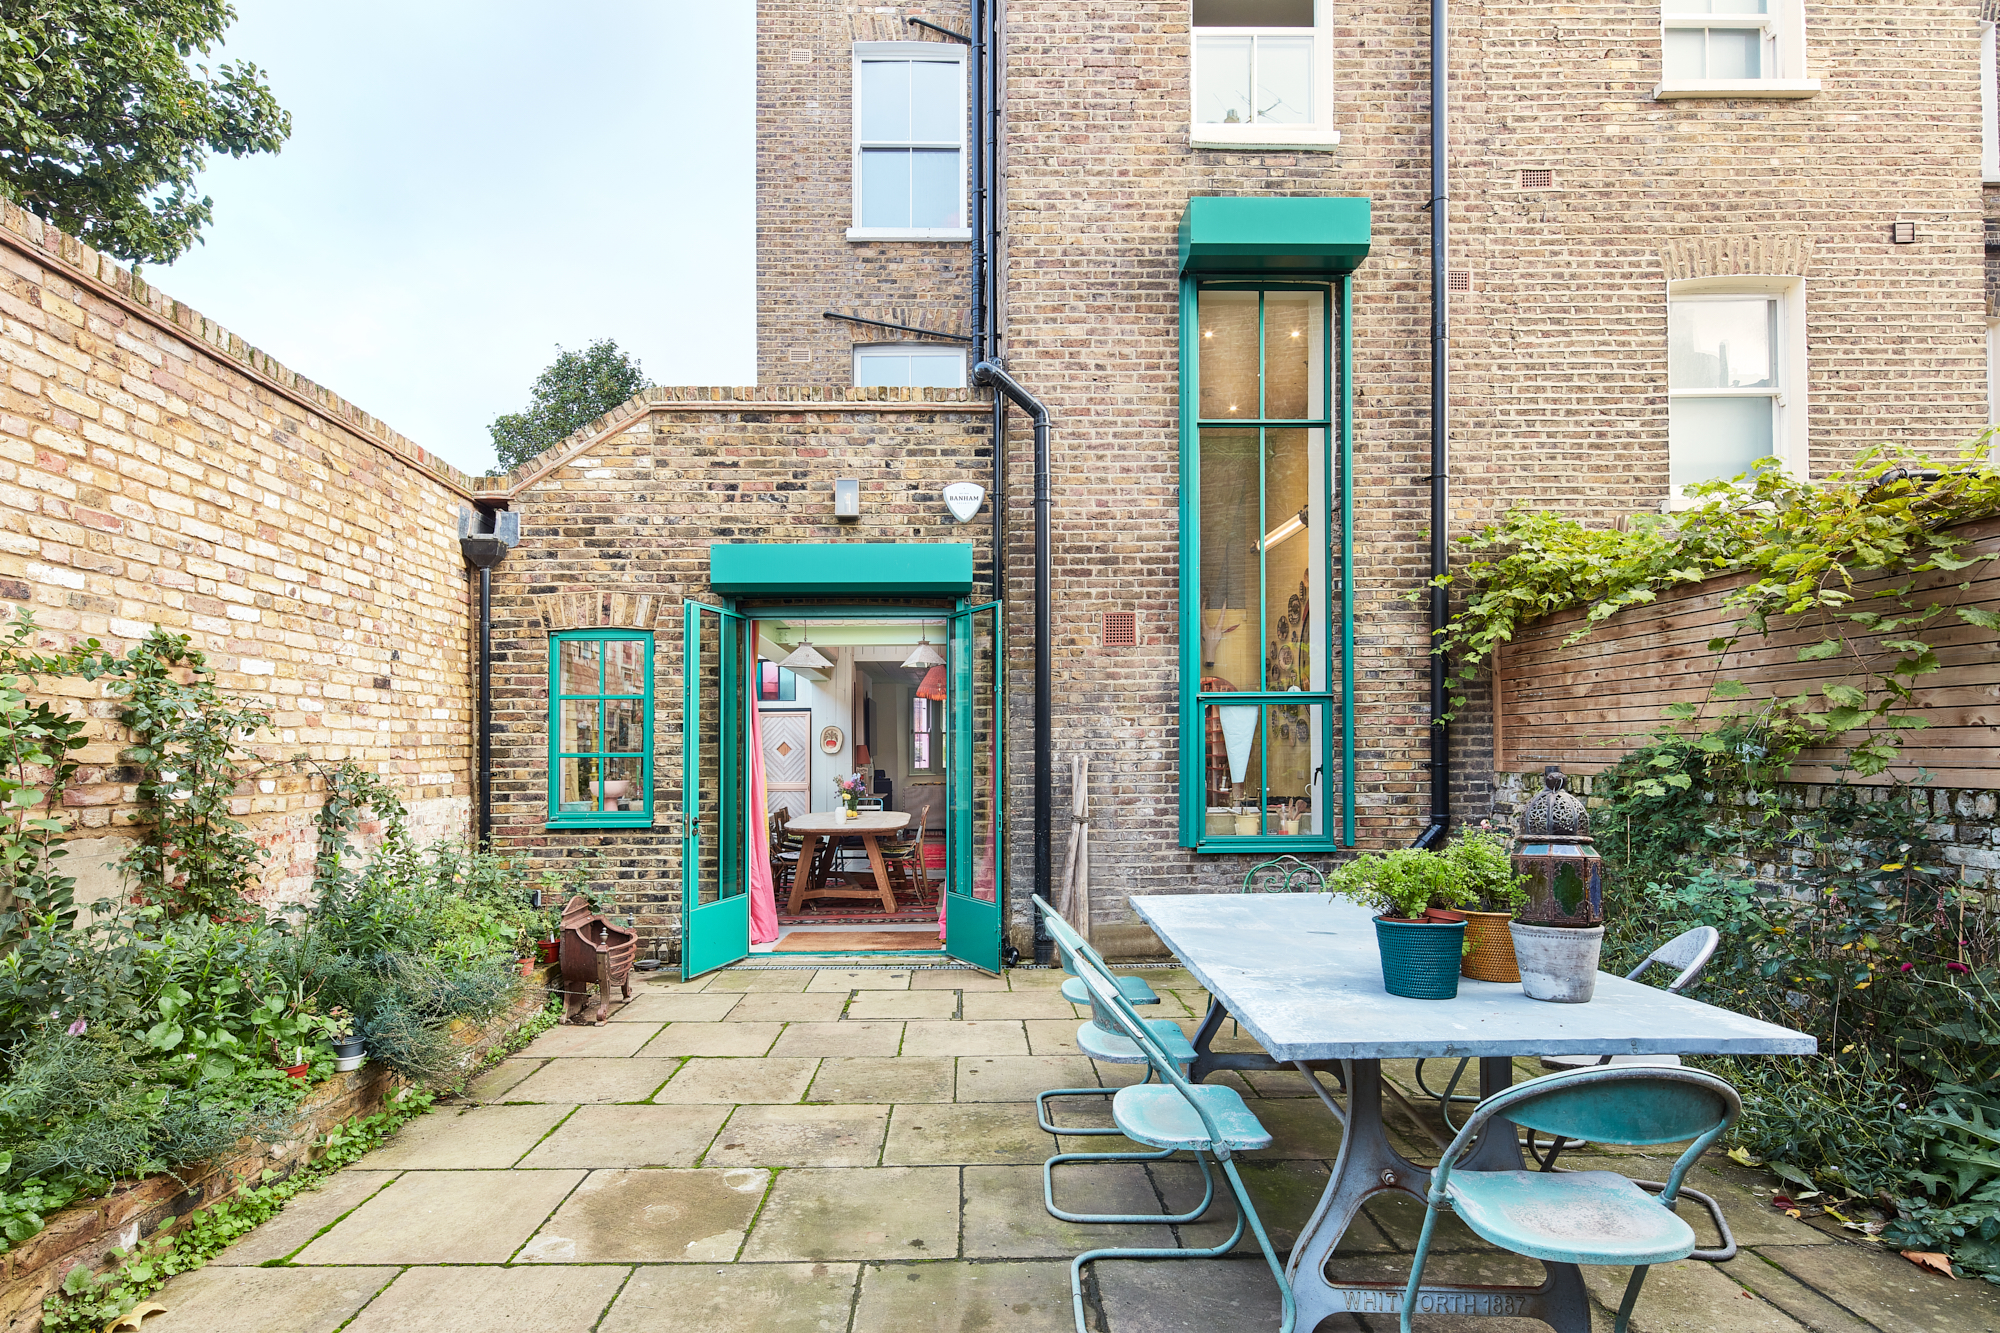 For Sale: Walterton Road Maida Hill W9 private garden with green panelled doors and windows